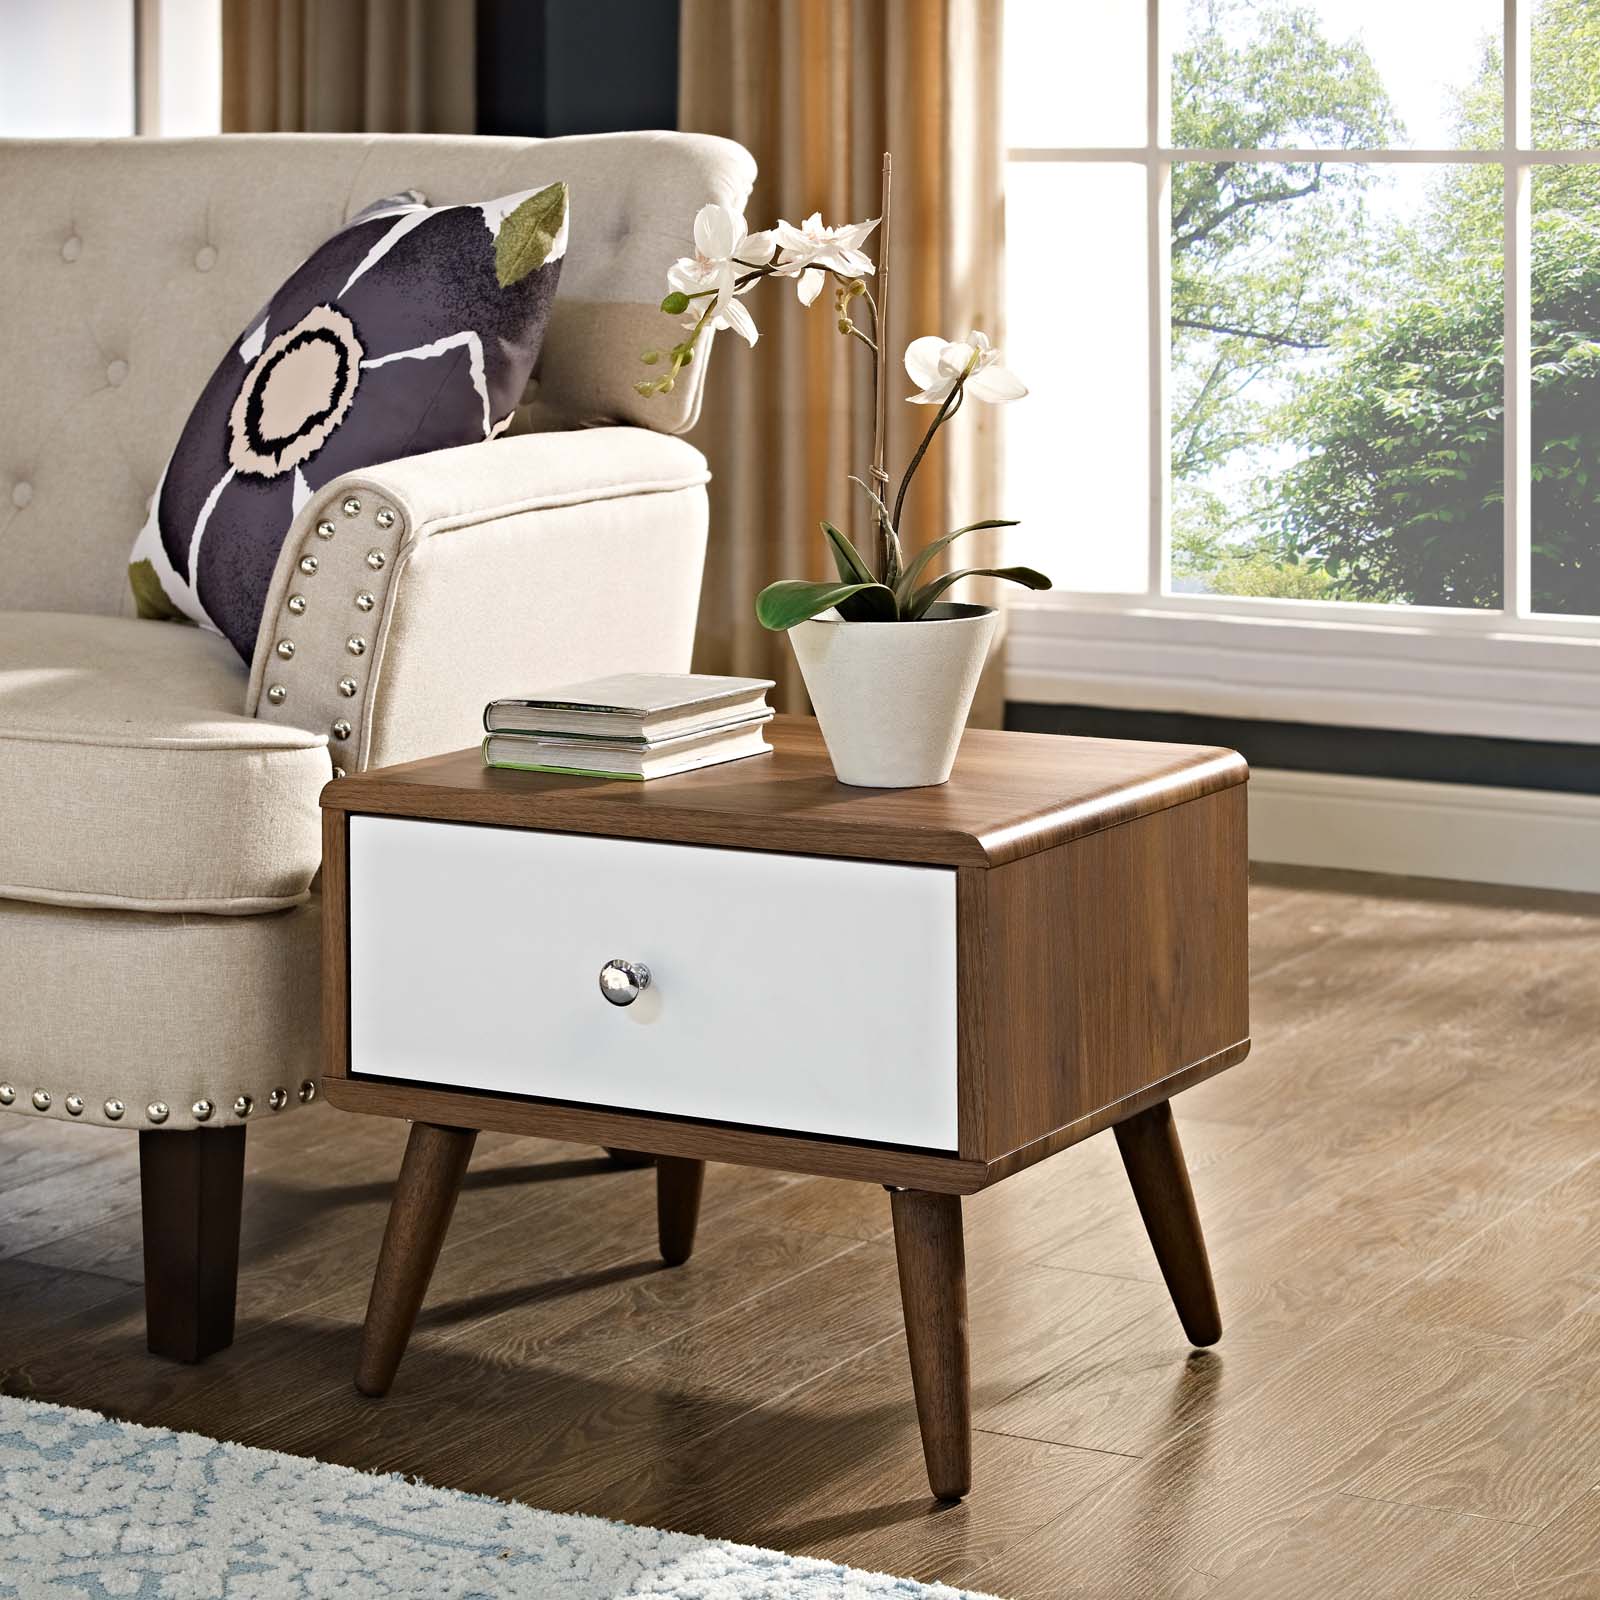 Modway Nightstands & Side Tables - Transmit Nightstand Walnut And White